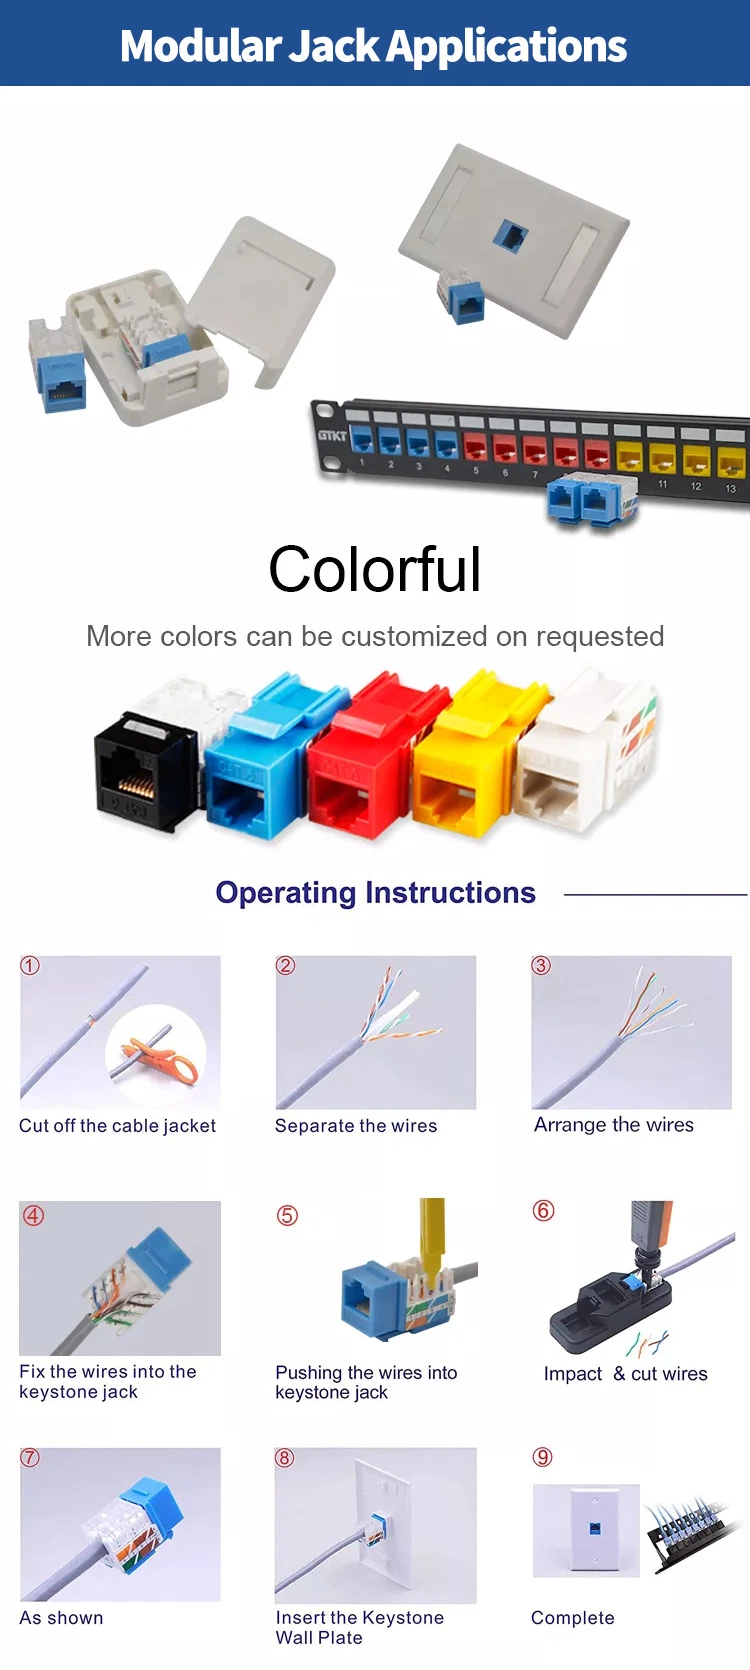 RJ45 CAT6 Keystone Jack Shielded Toolless Type Cat 6 Module Jack for Wal Plate and Blank Patch Panel